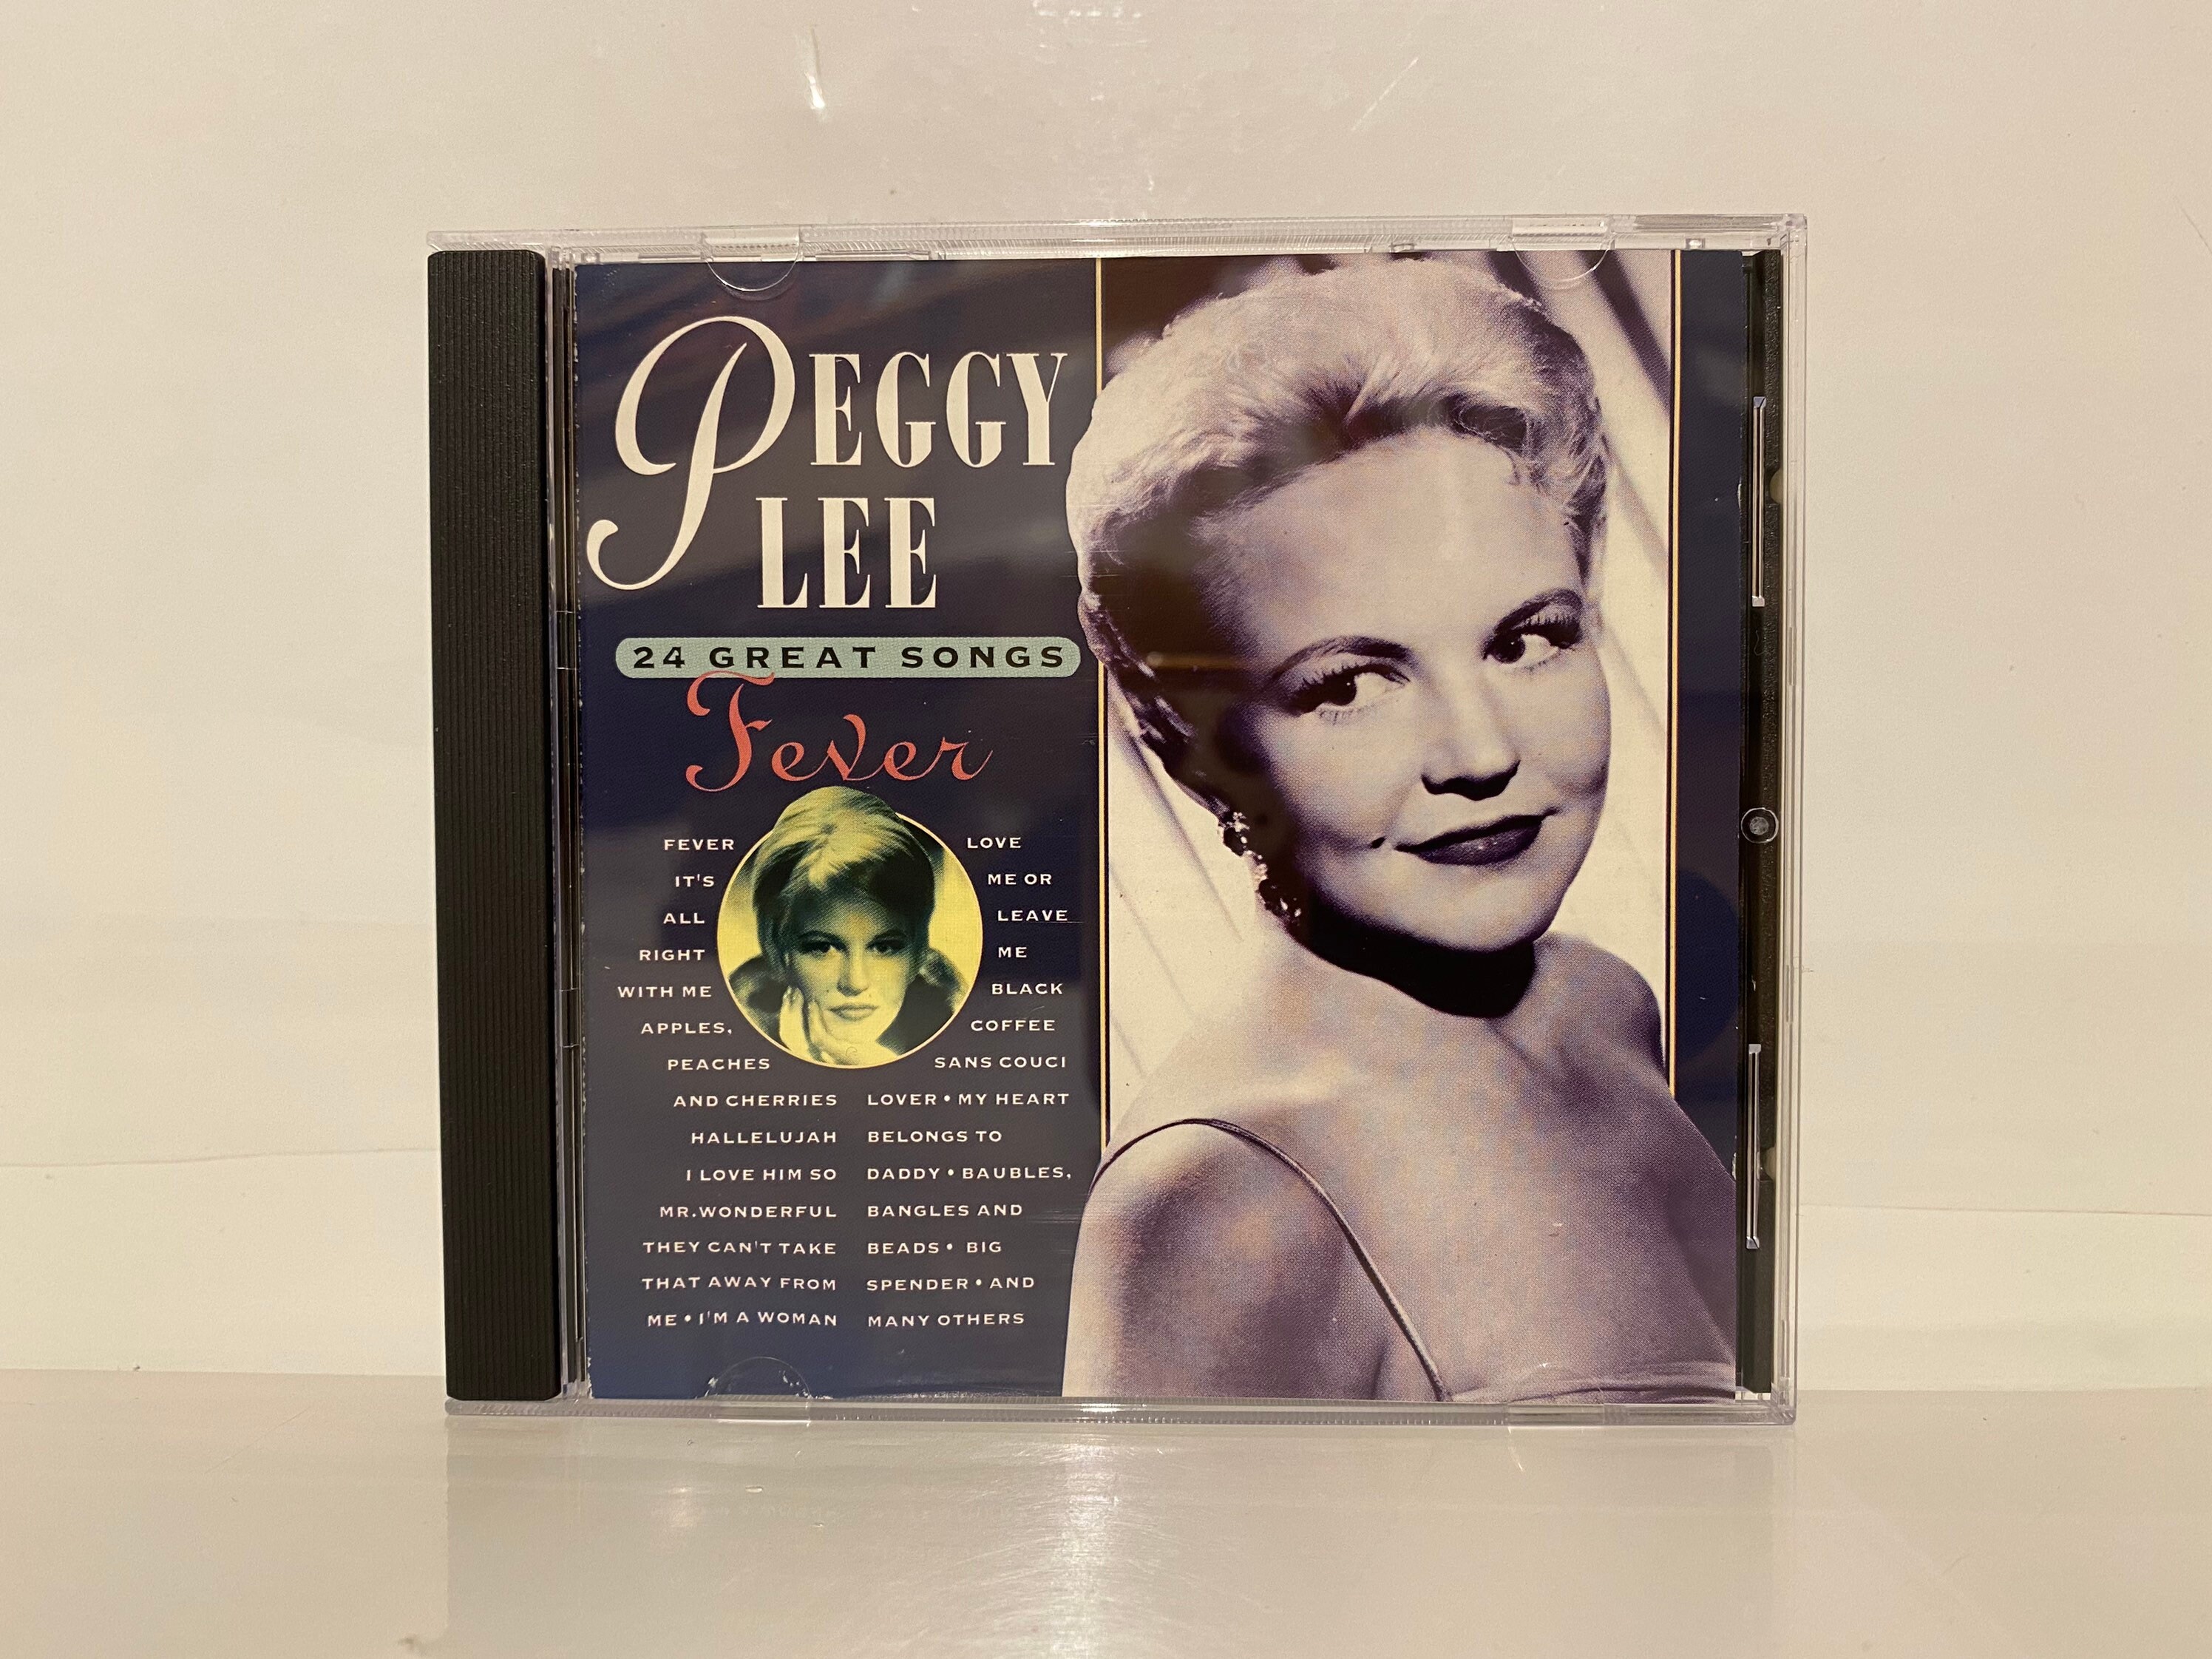 Peggy Lee CD Collection Album Fever 24 Great Songs Genre Jazz - Etsy Finland